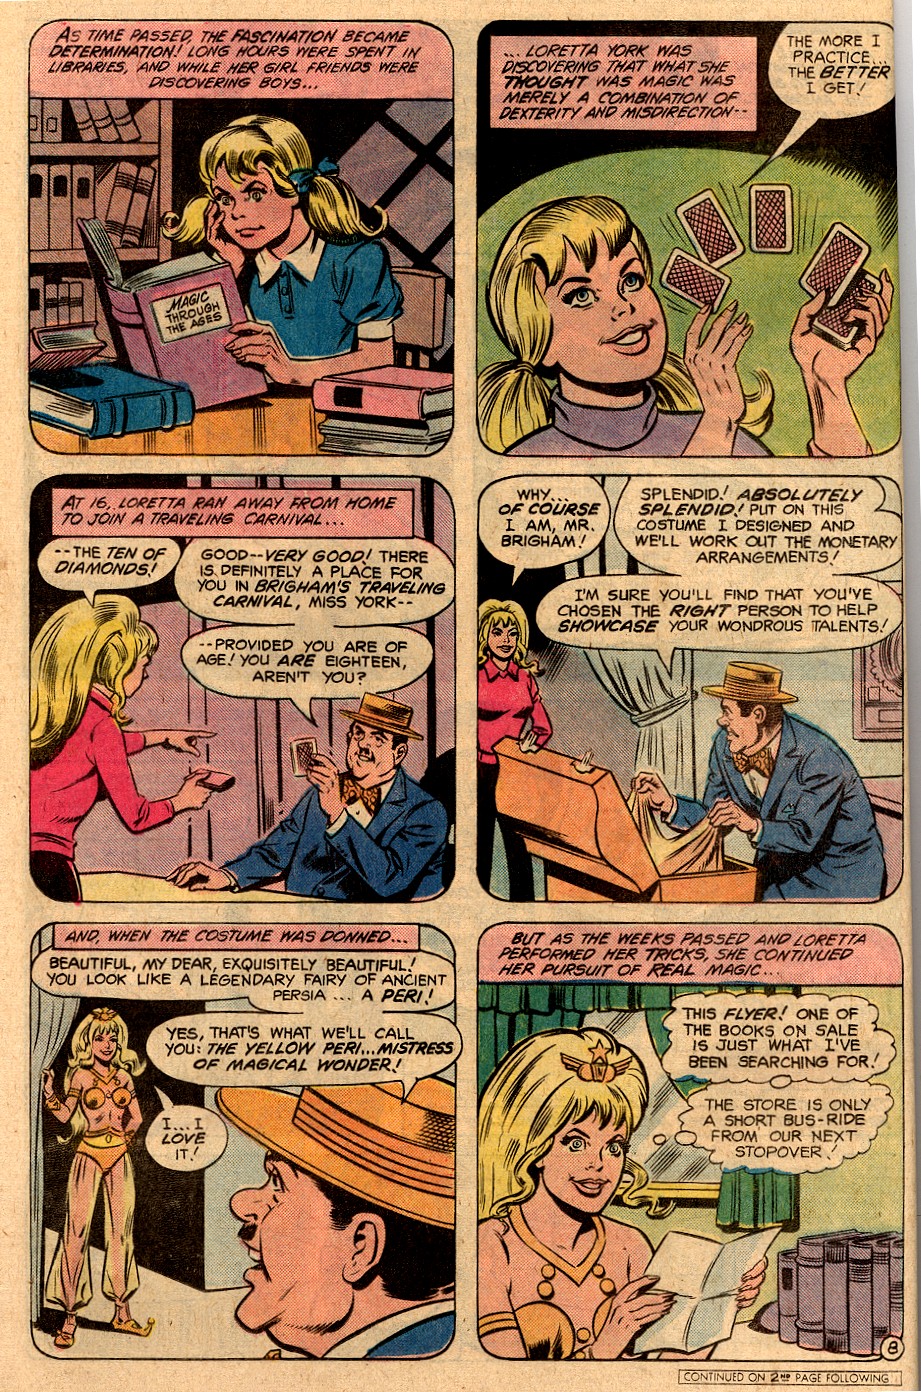 The New Adventures of Superboy 34 Page 11